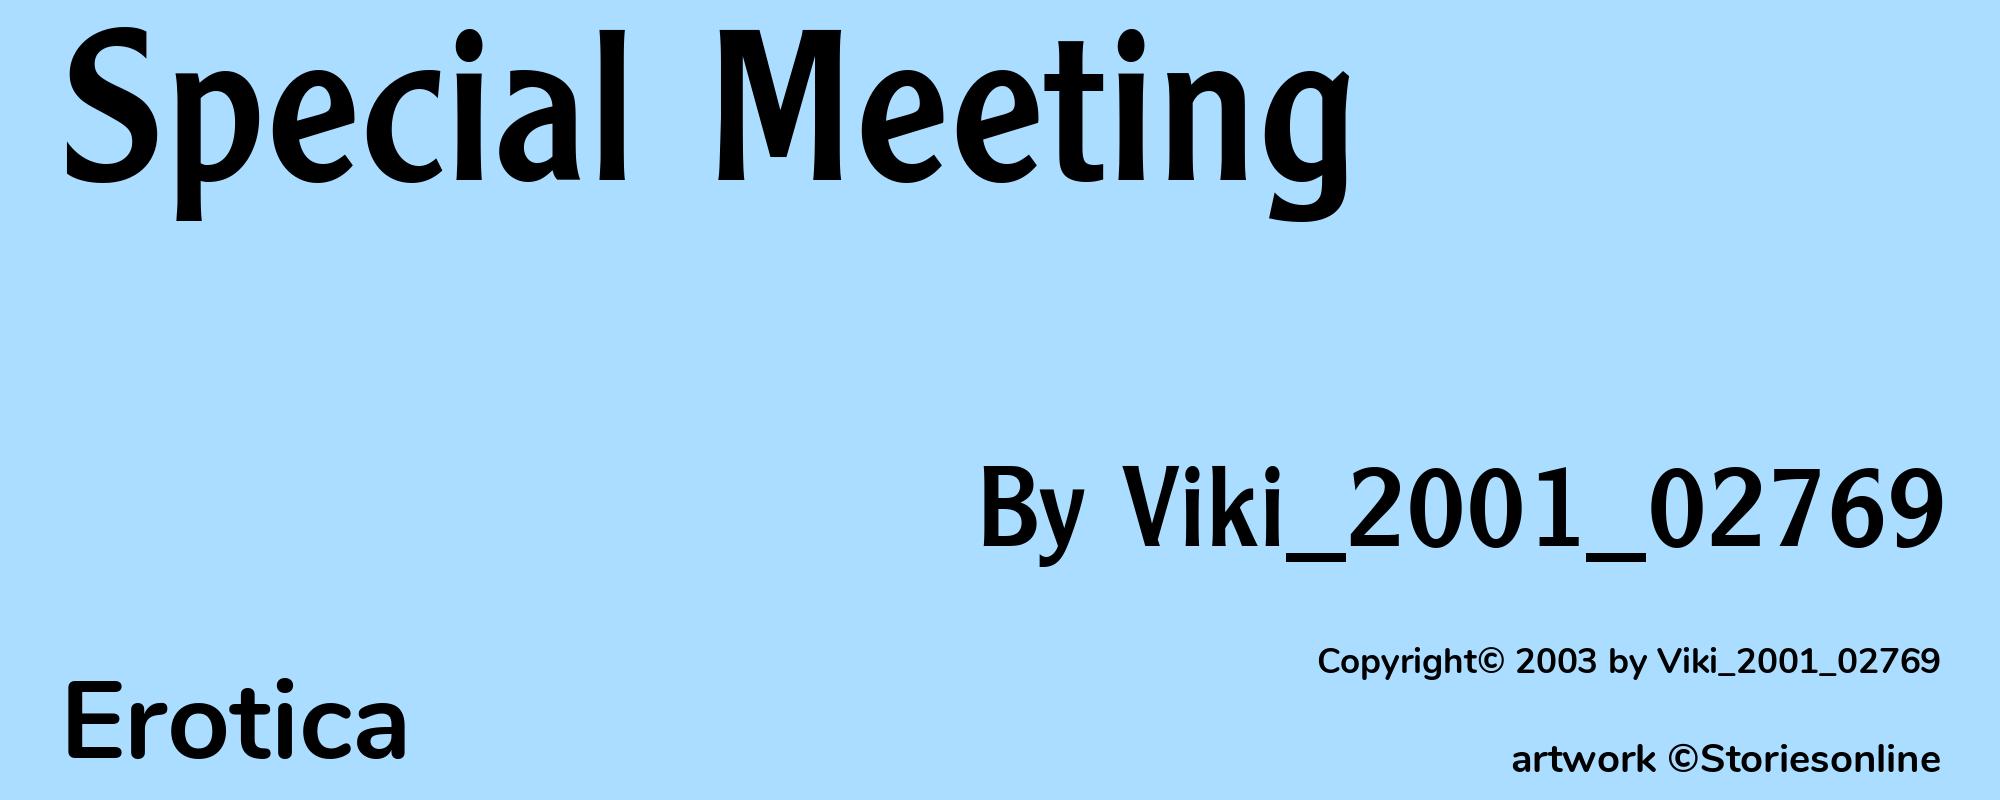 Special Meeting - Cover